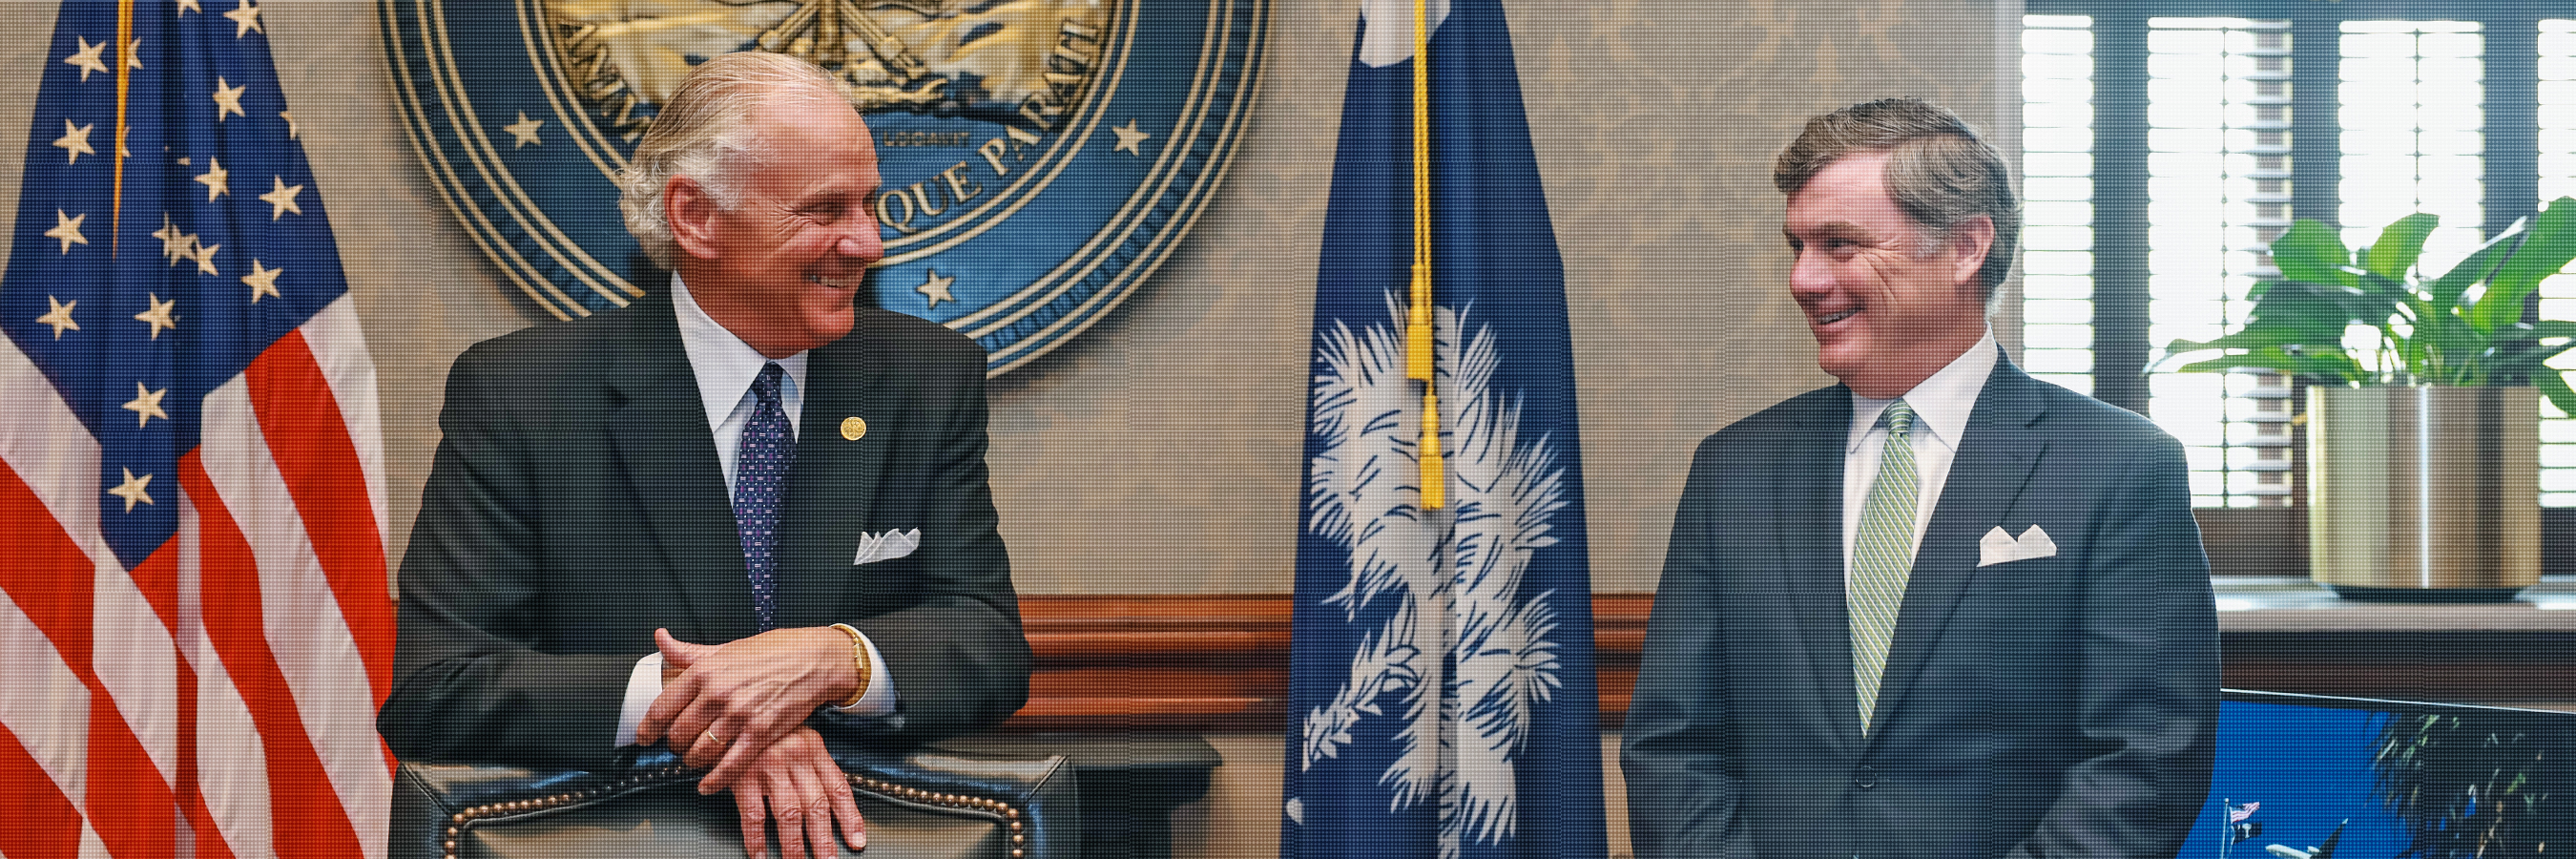 Photo of Director Stirling in the Governor's Office